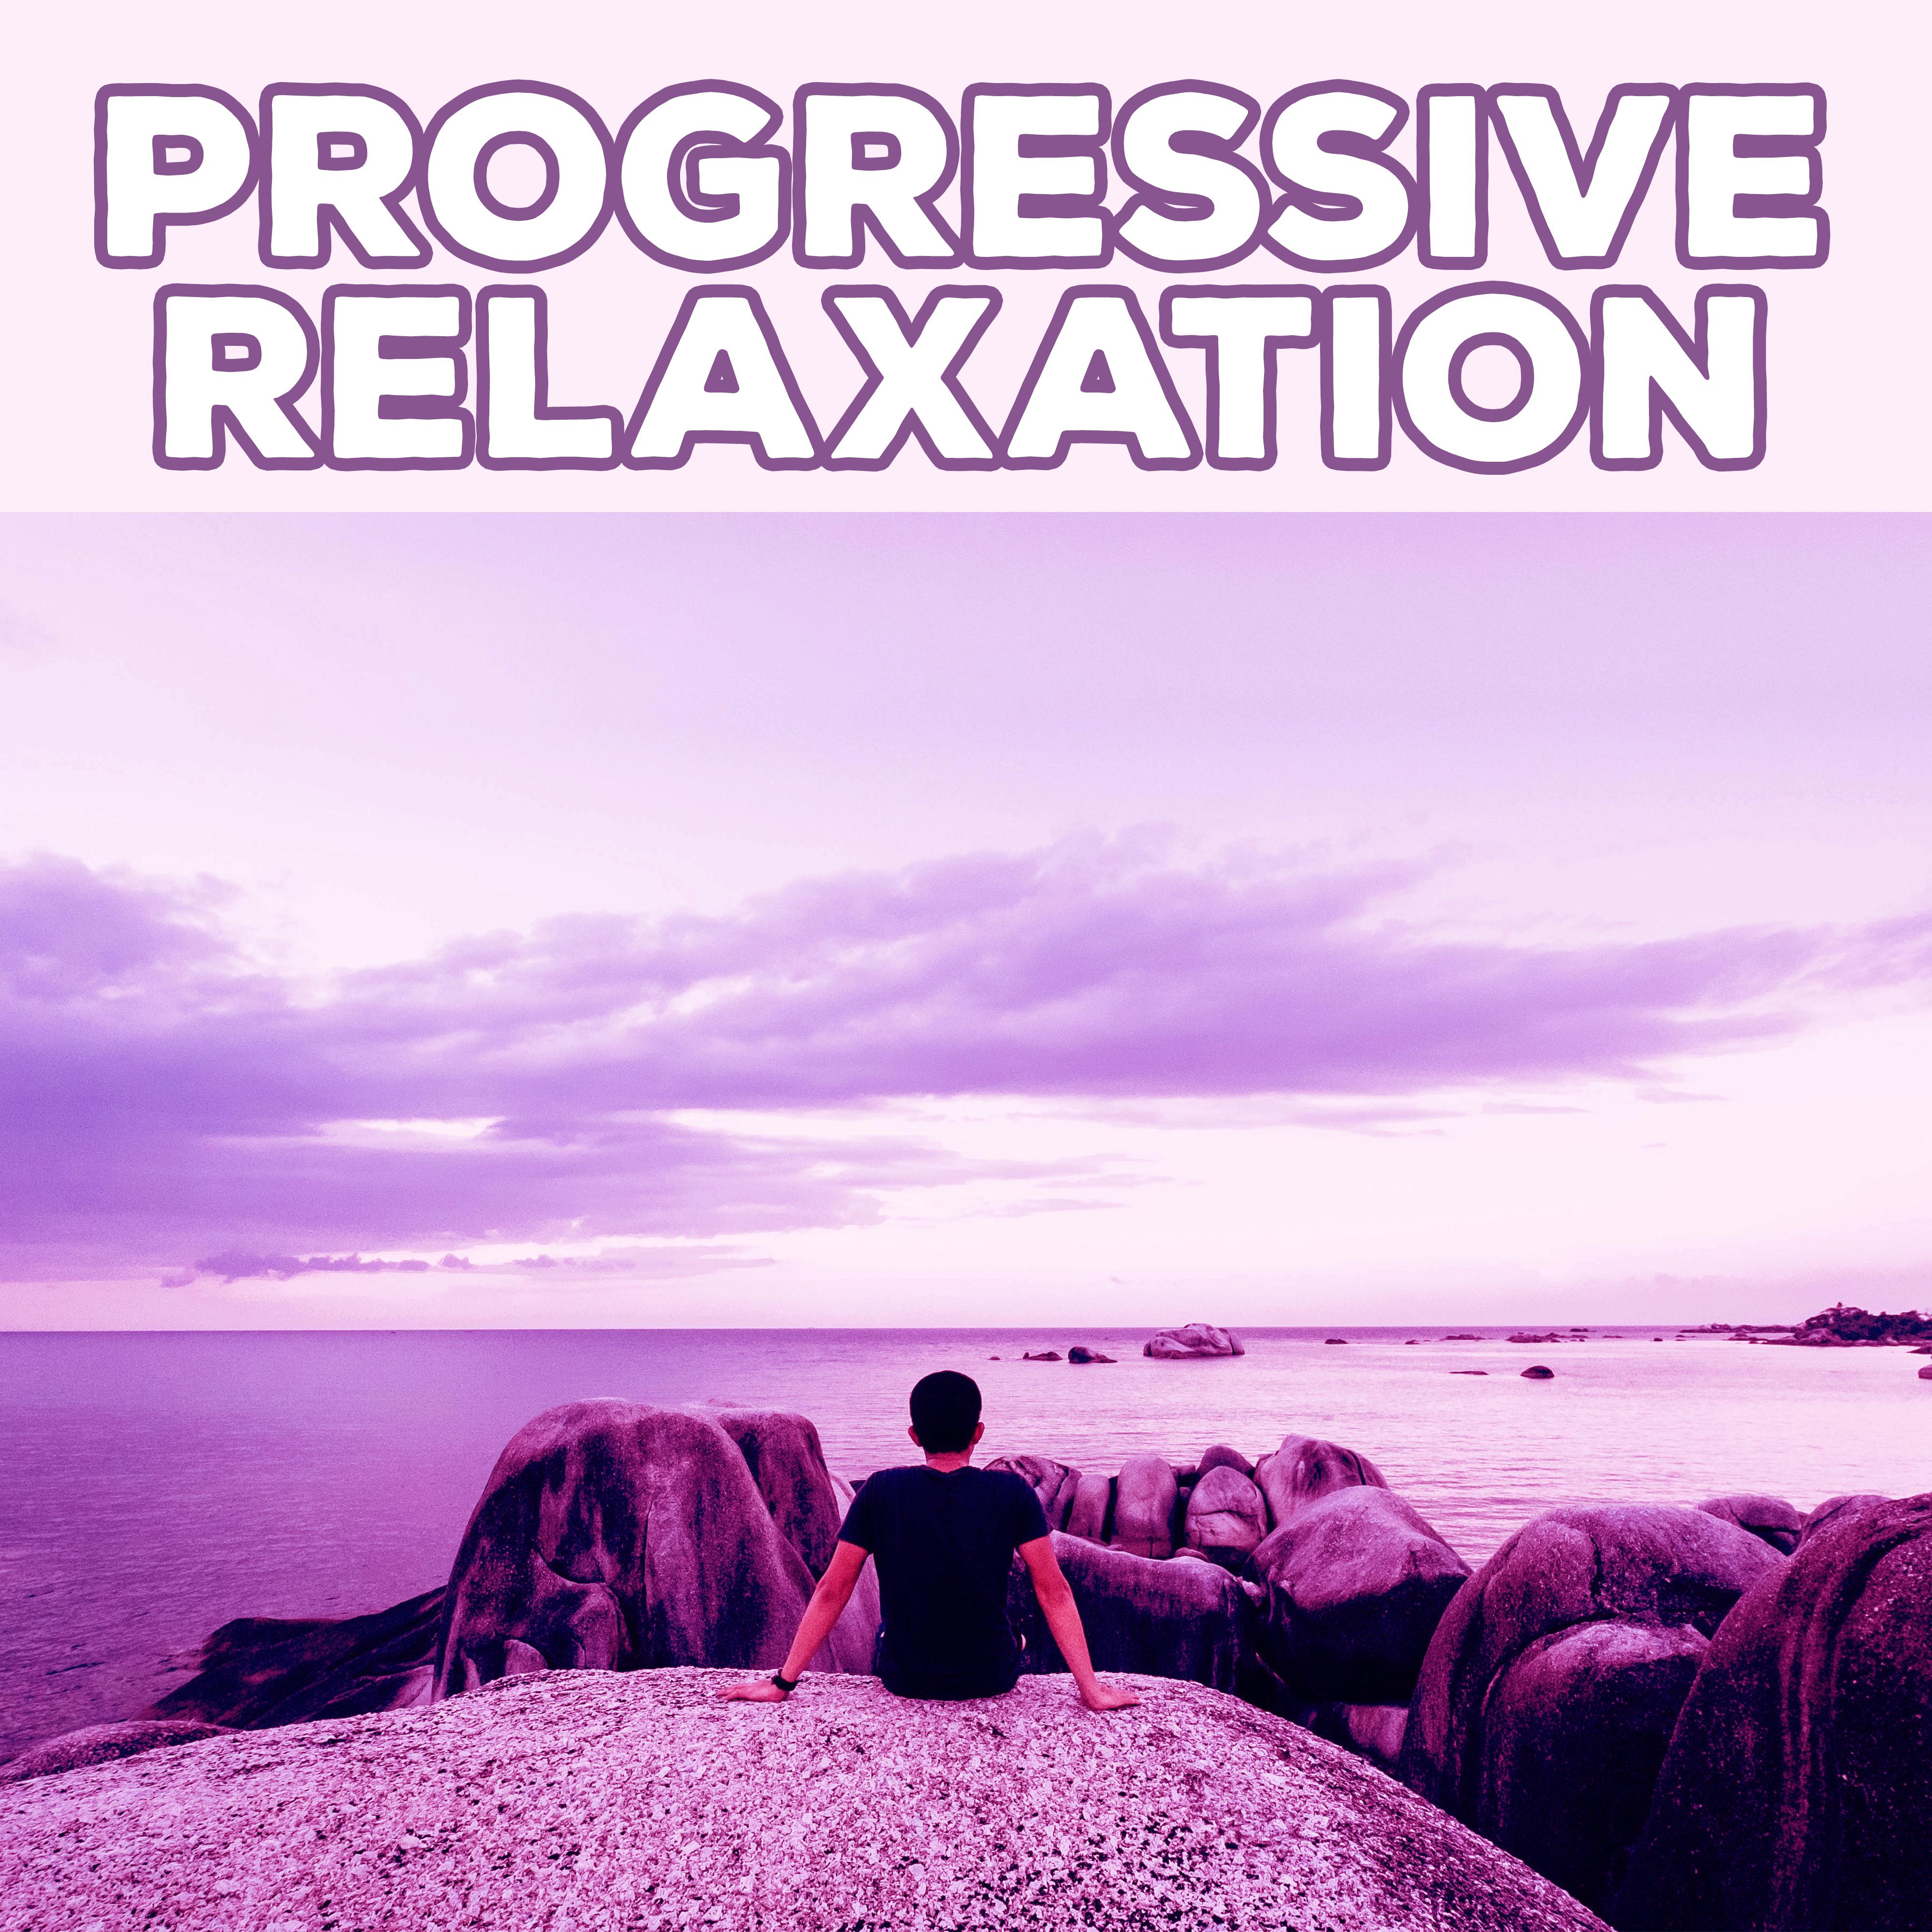 Progressive Relaxation - Relaxing Piano Music, Easy Going, Lounge Relax, Relaxation Music to Calm Down, Easy Sleep